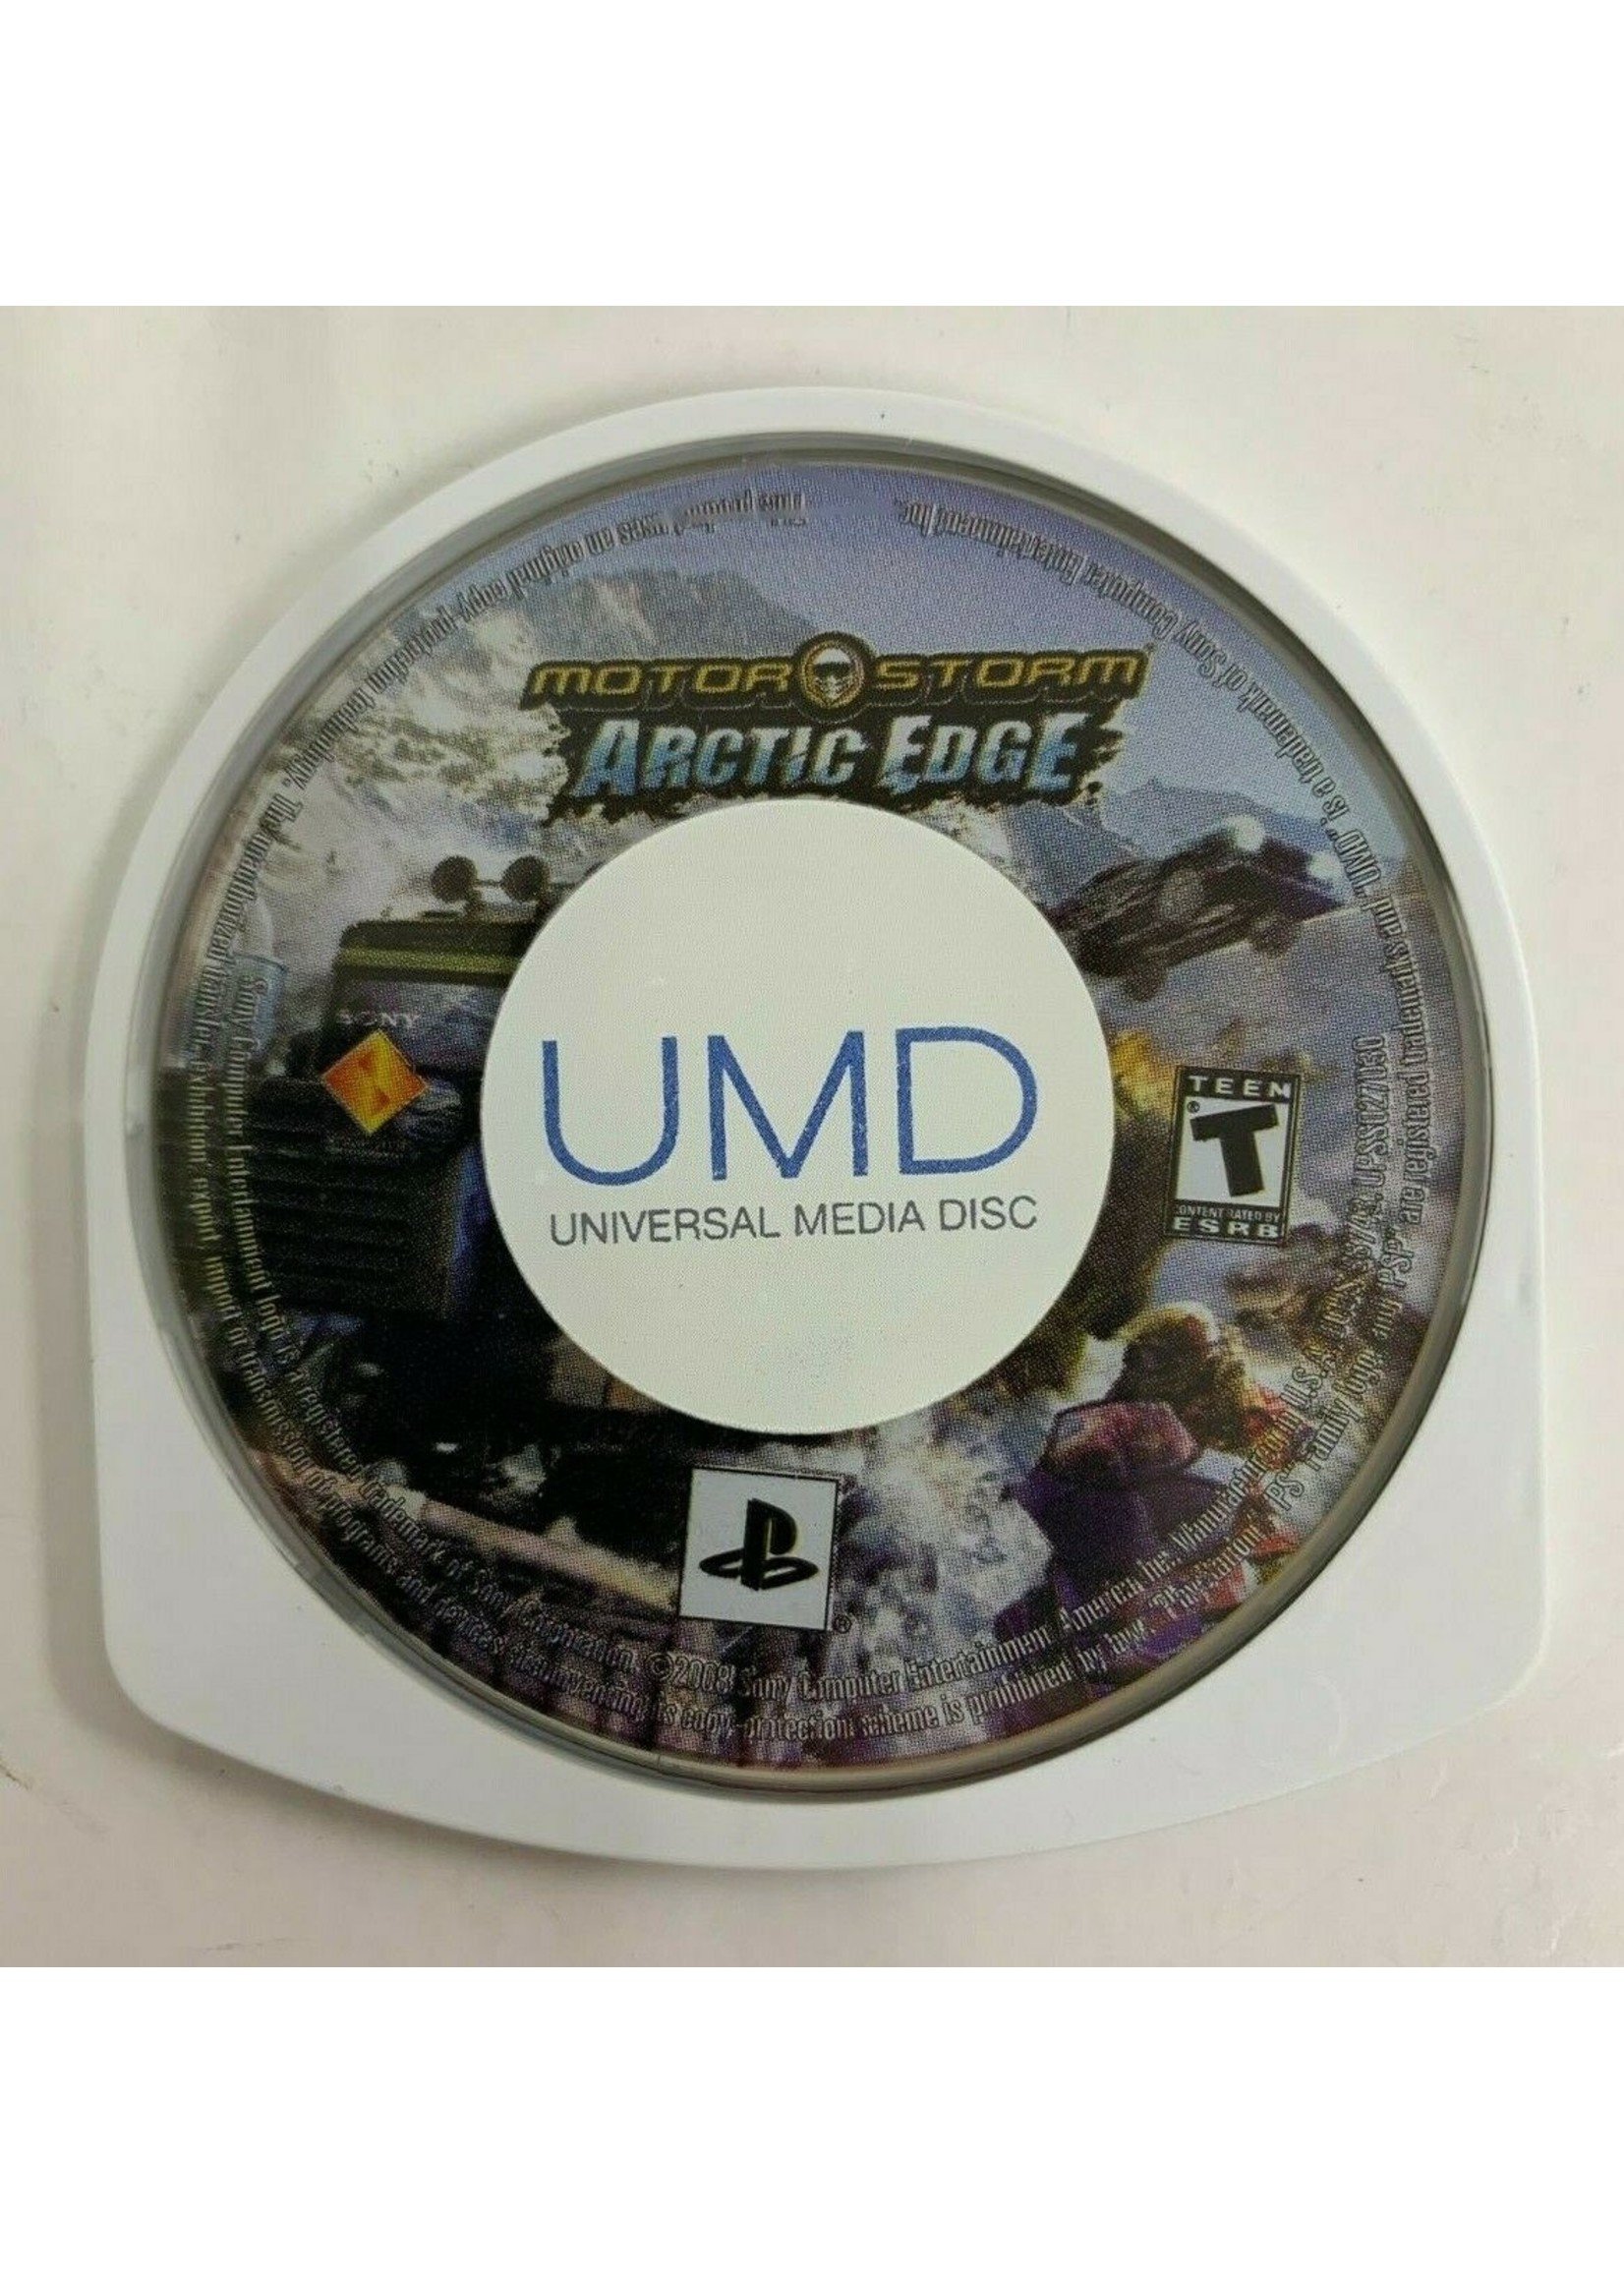 Sony Playstation Portable (PSP) MotorStorm: Arctic Edge (Game Only)